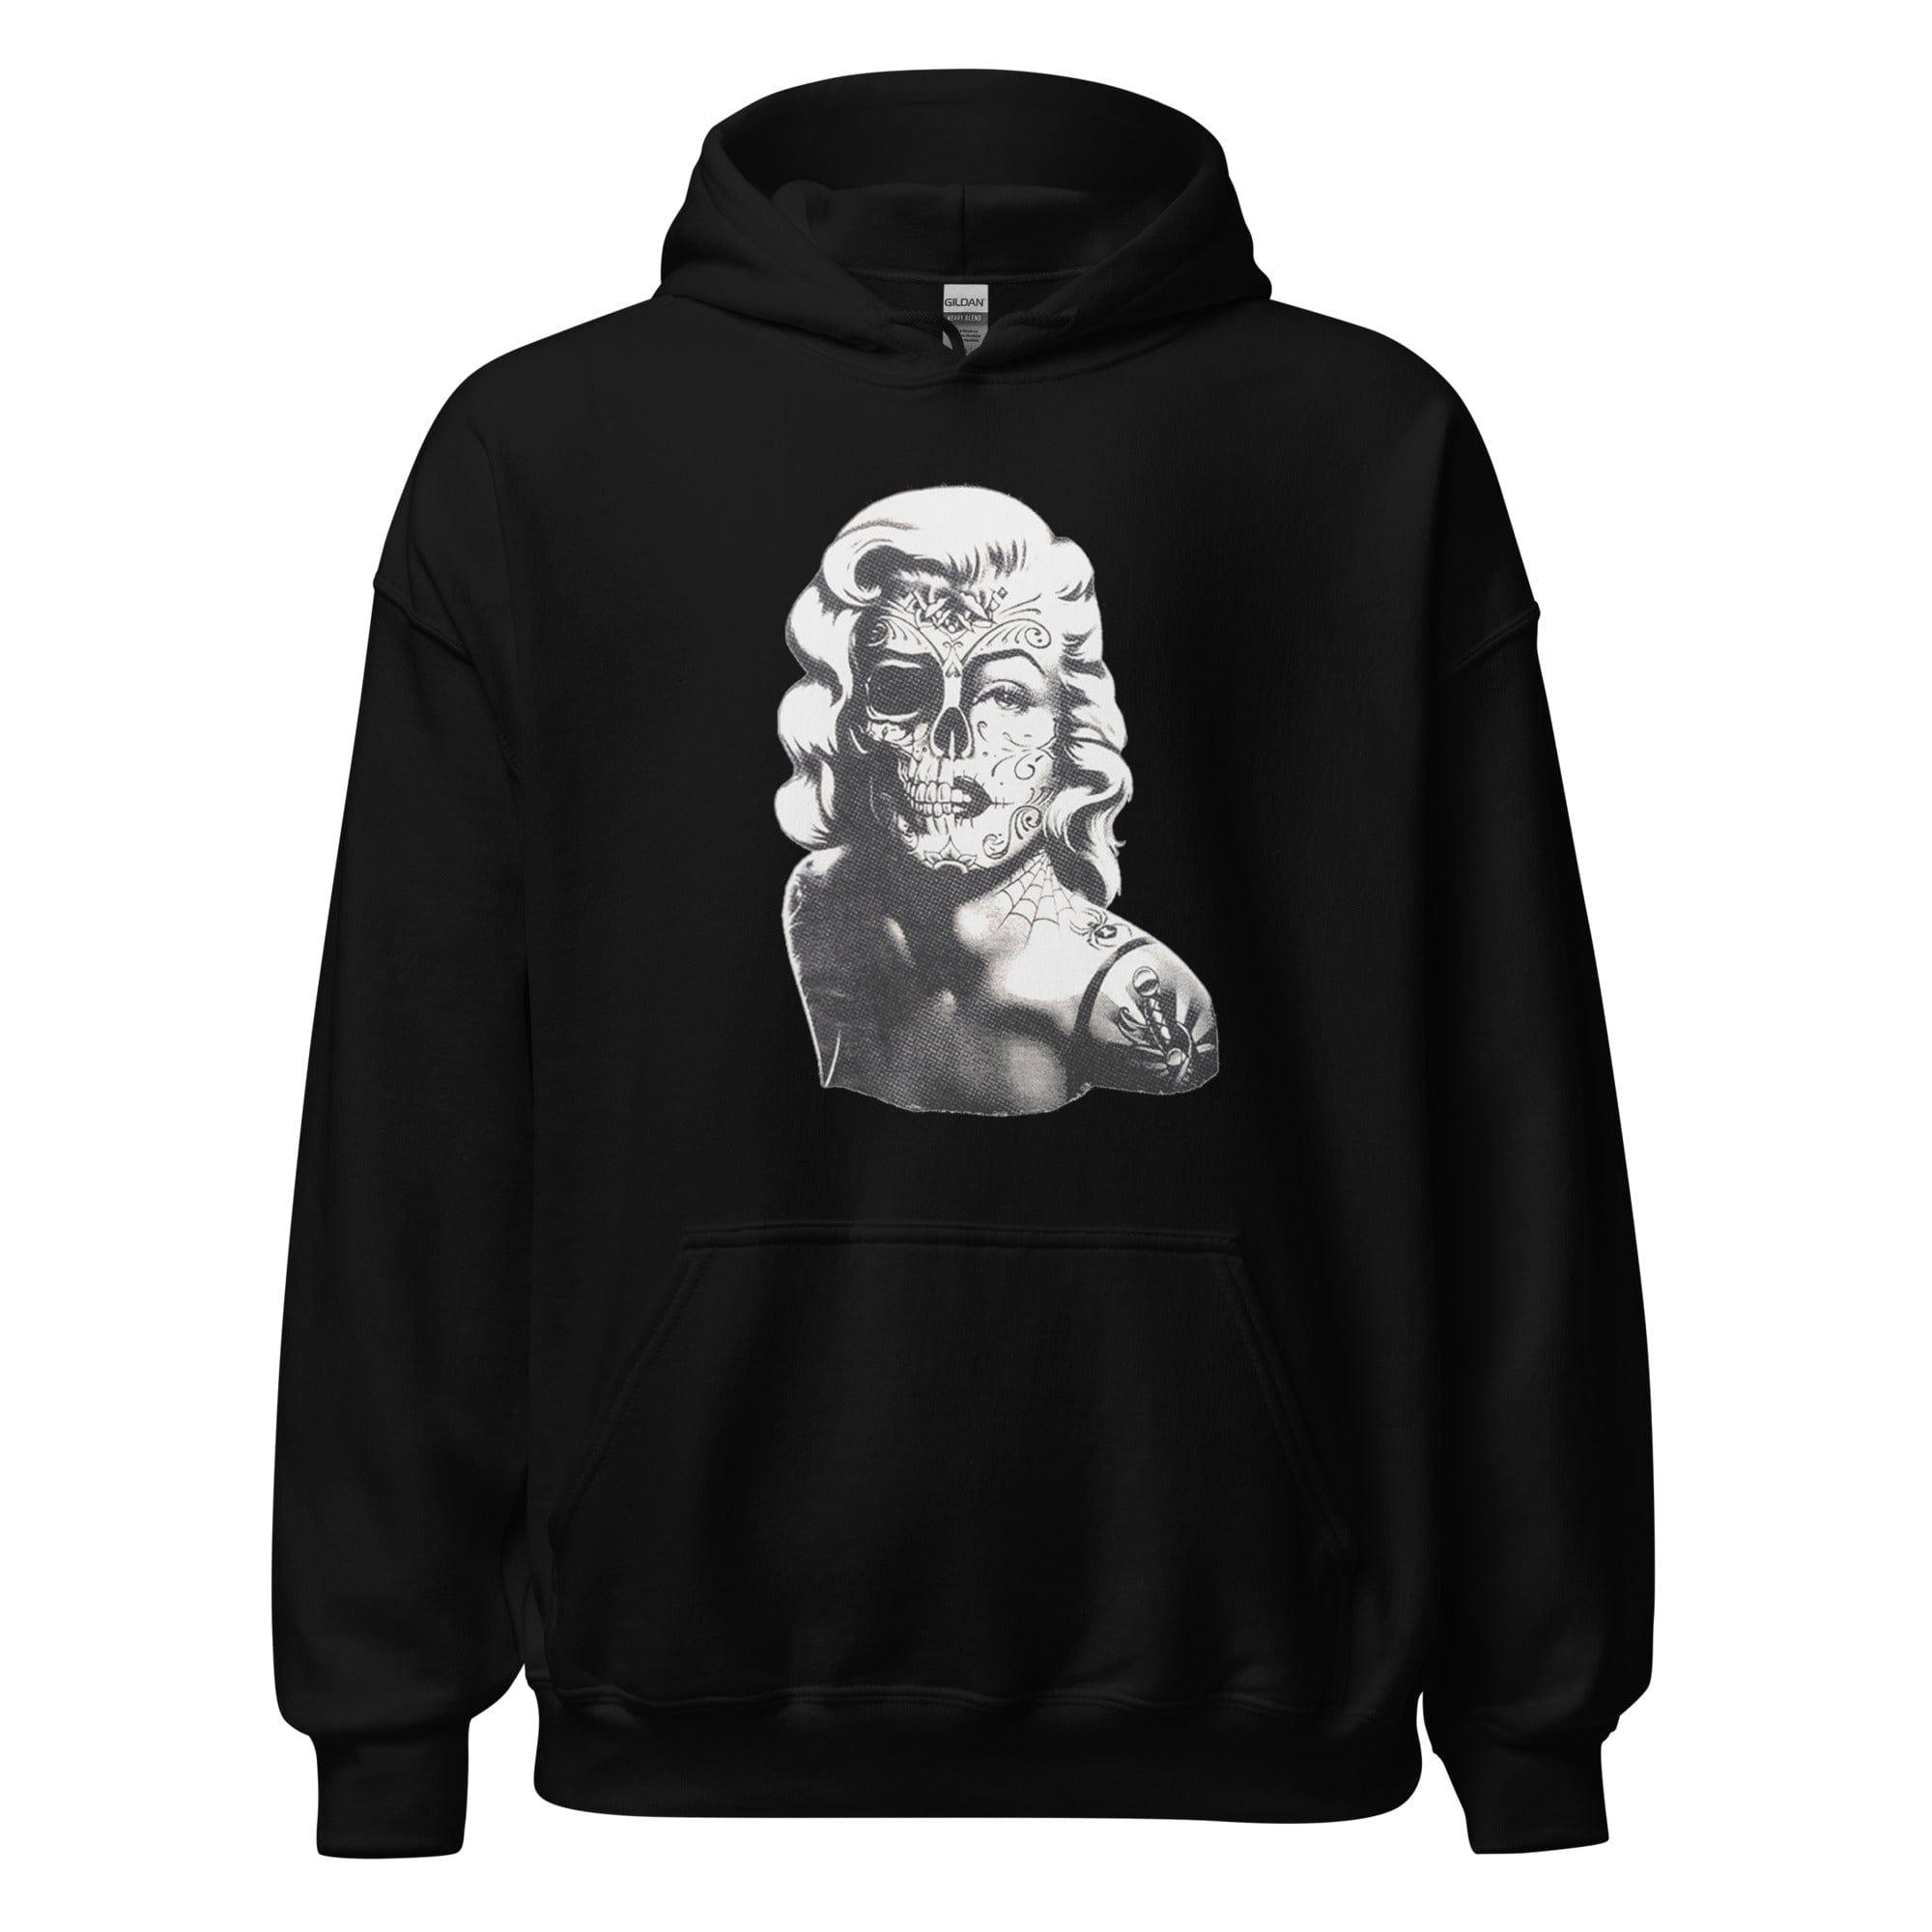 Marilyn Monroe Hoodie Classic Actress's Pop Culture Portrait with Half Skull in Tattoo Style Unisex Pullover - TopKoalaTee